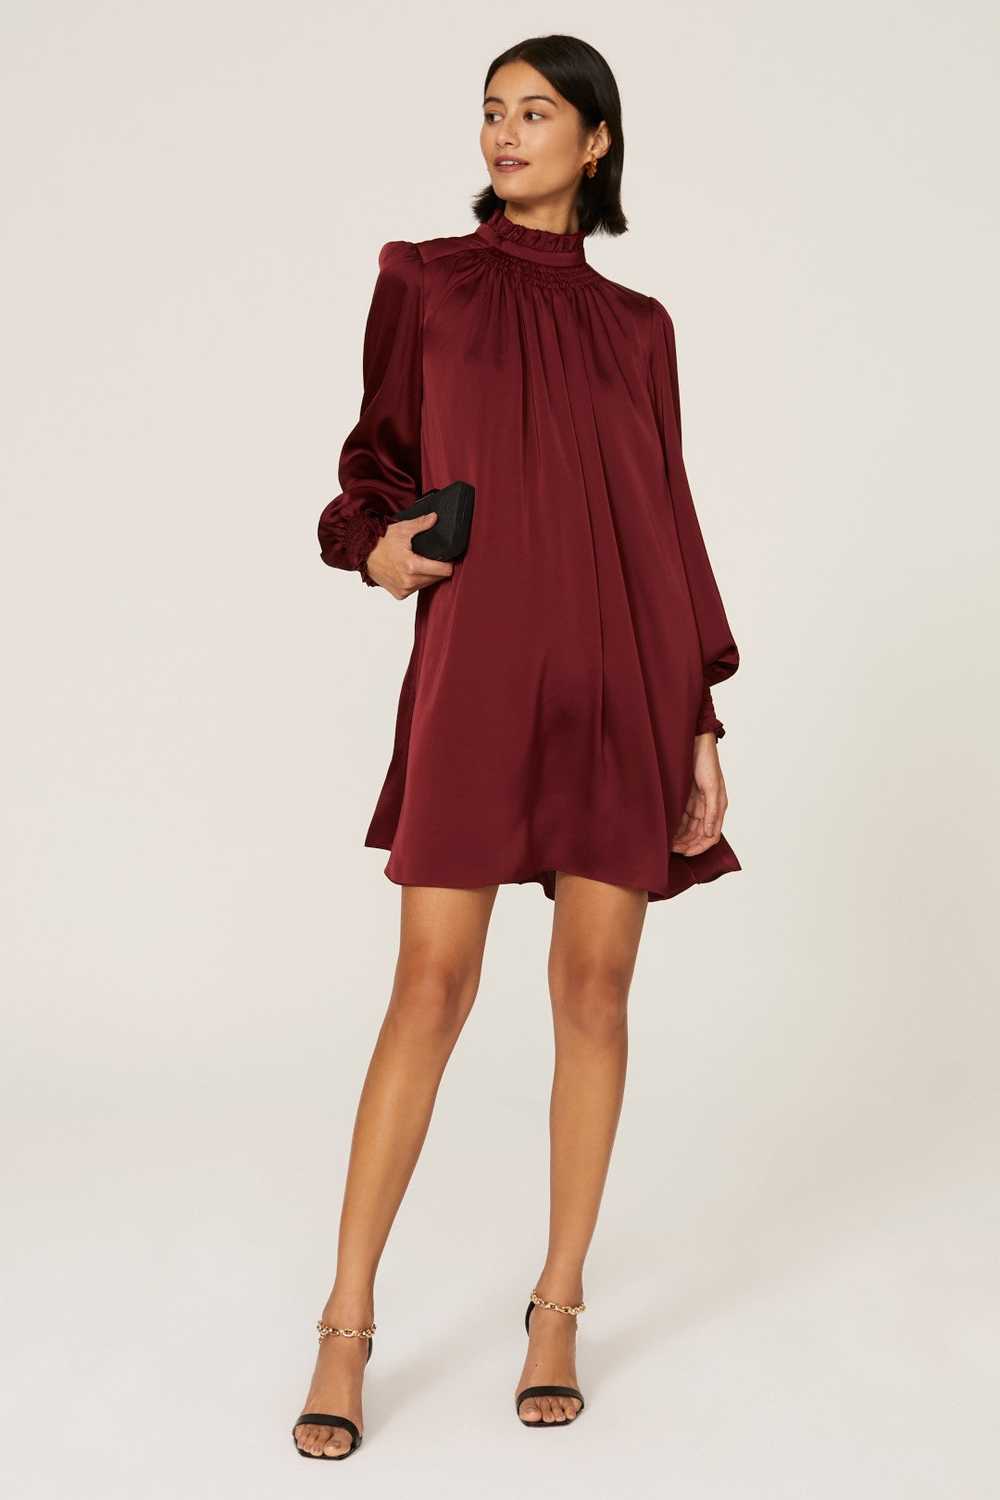 Adam Lippes Collective Ruffle Neck Charmeuse Dress - image 1